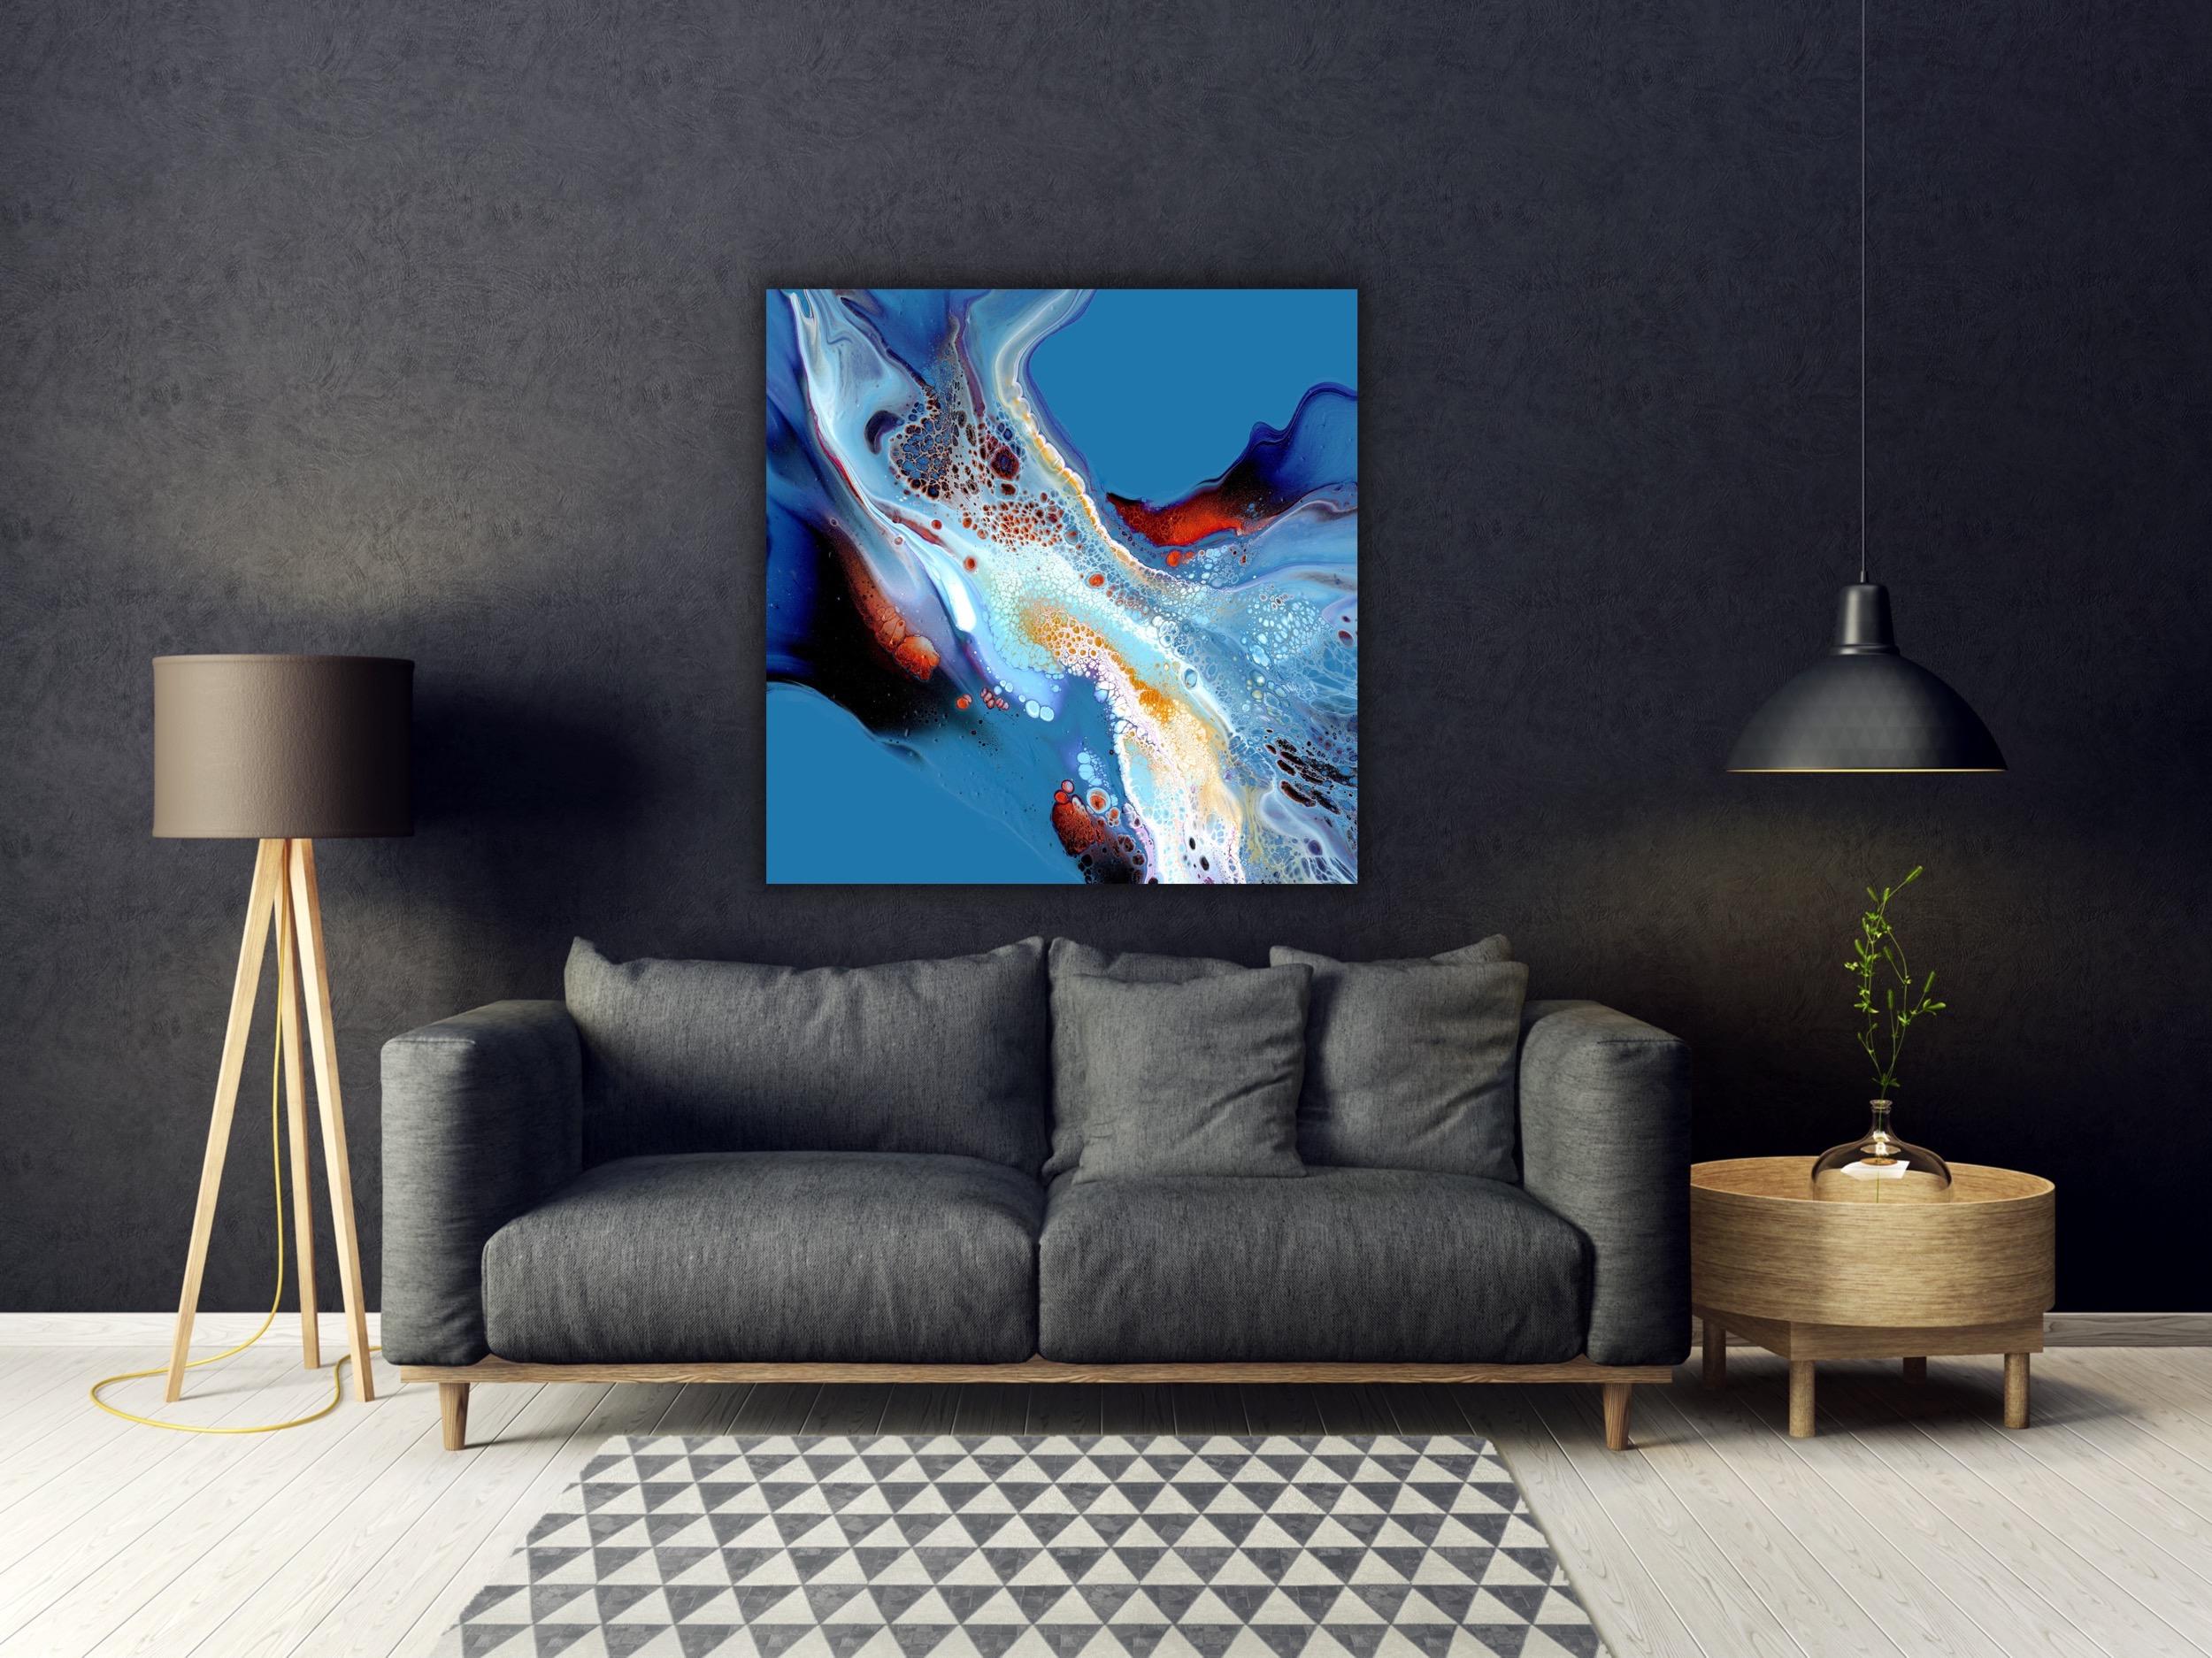 This contemporary modern abstract painting is printed on a lightweight metal composite and comes ready to hang. This vibrant composition can be hung both indoor and outdoor as it is weather resistant.

-Title: Gemini 
-Artist: Celeste